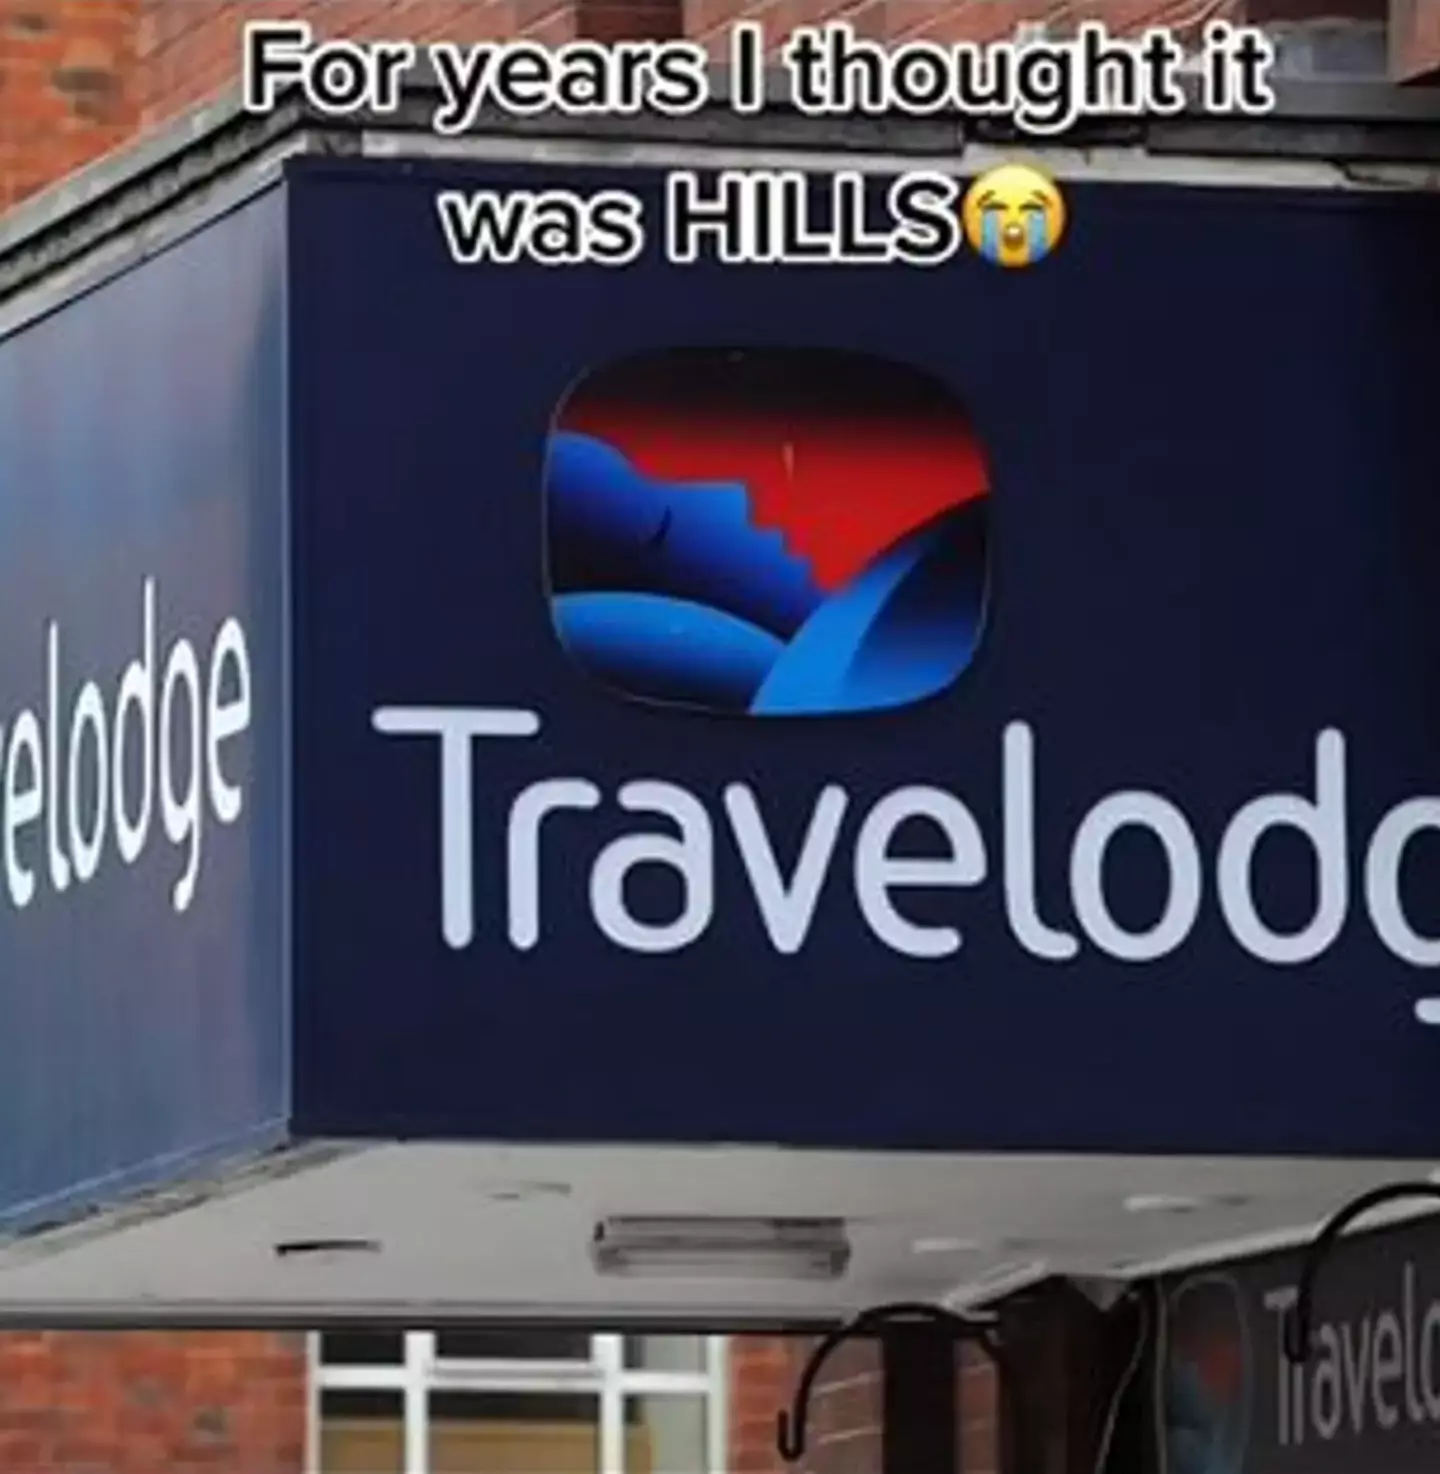 TikTok users were floored by the real meaning of the Travelodge logo.